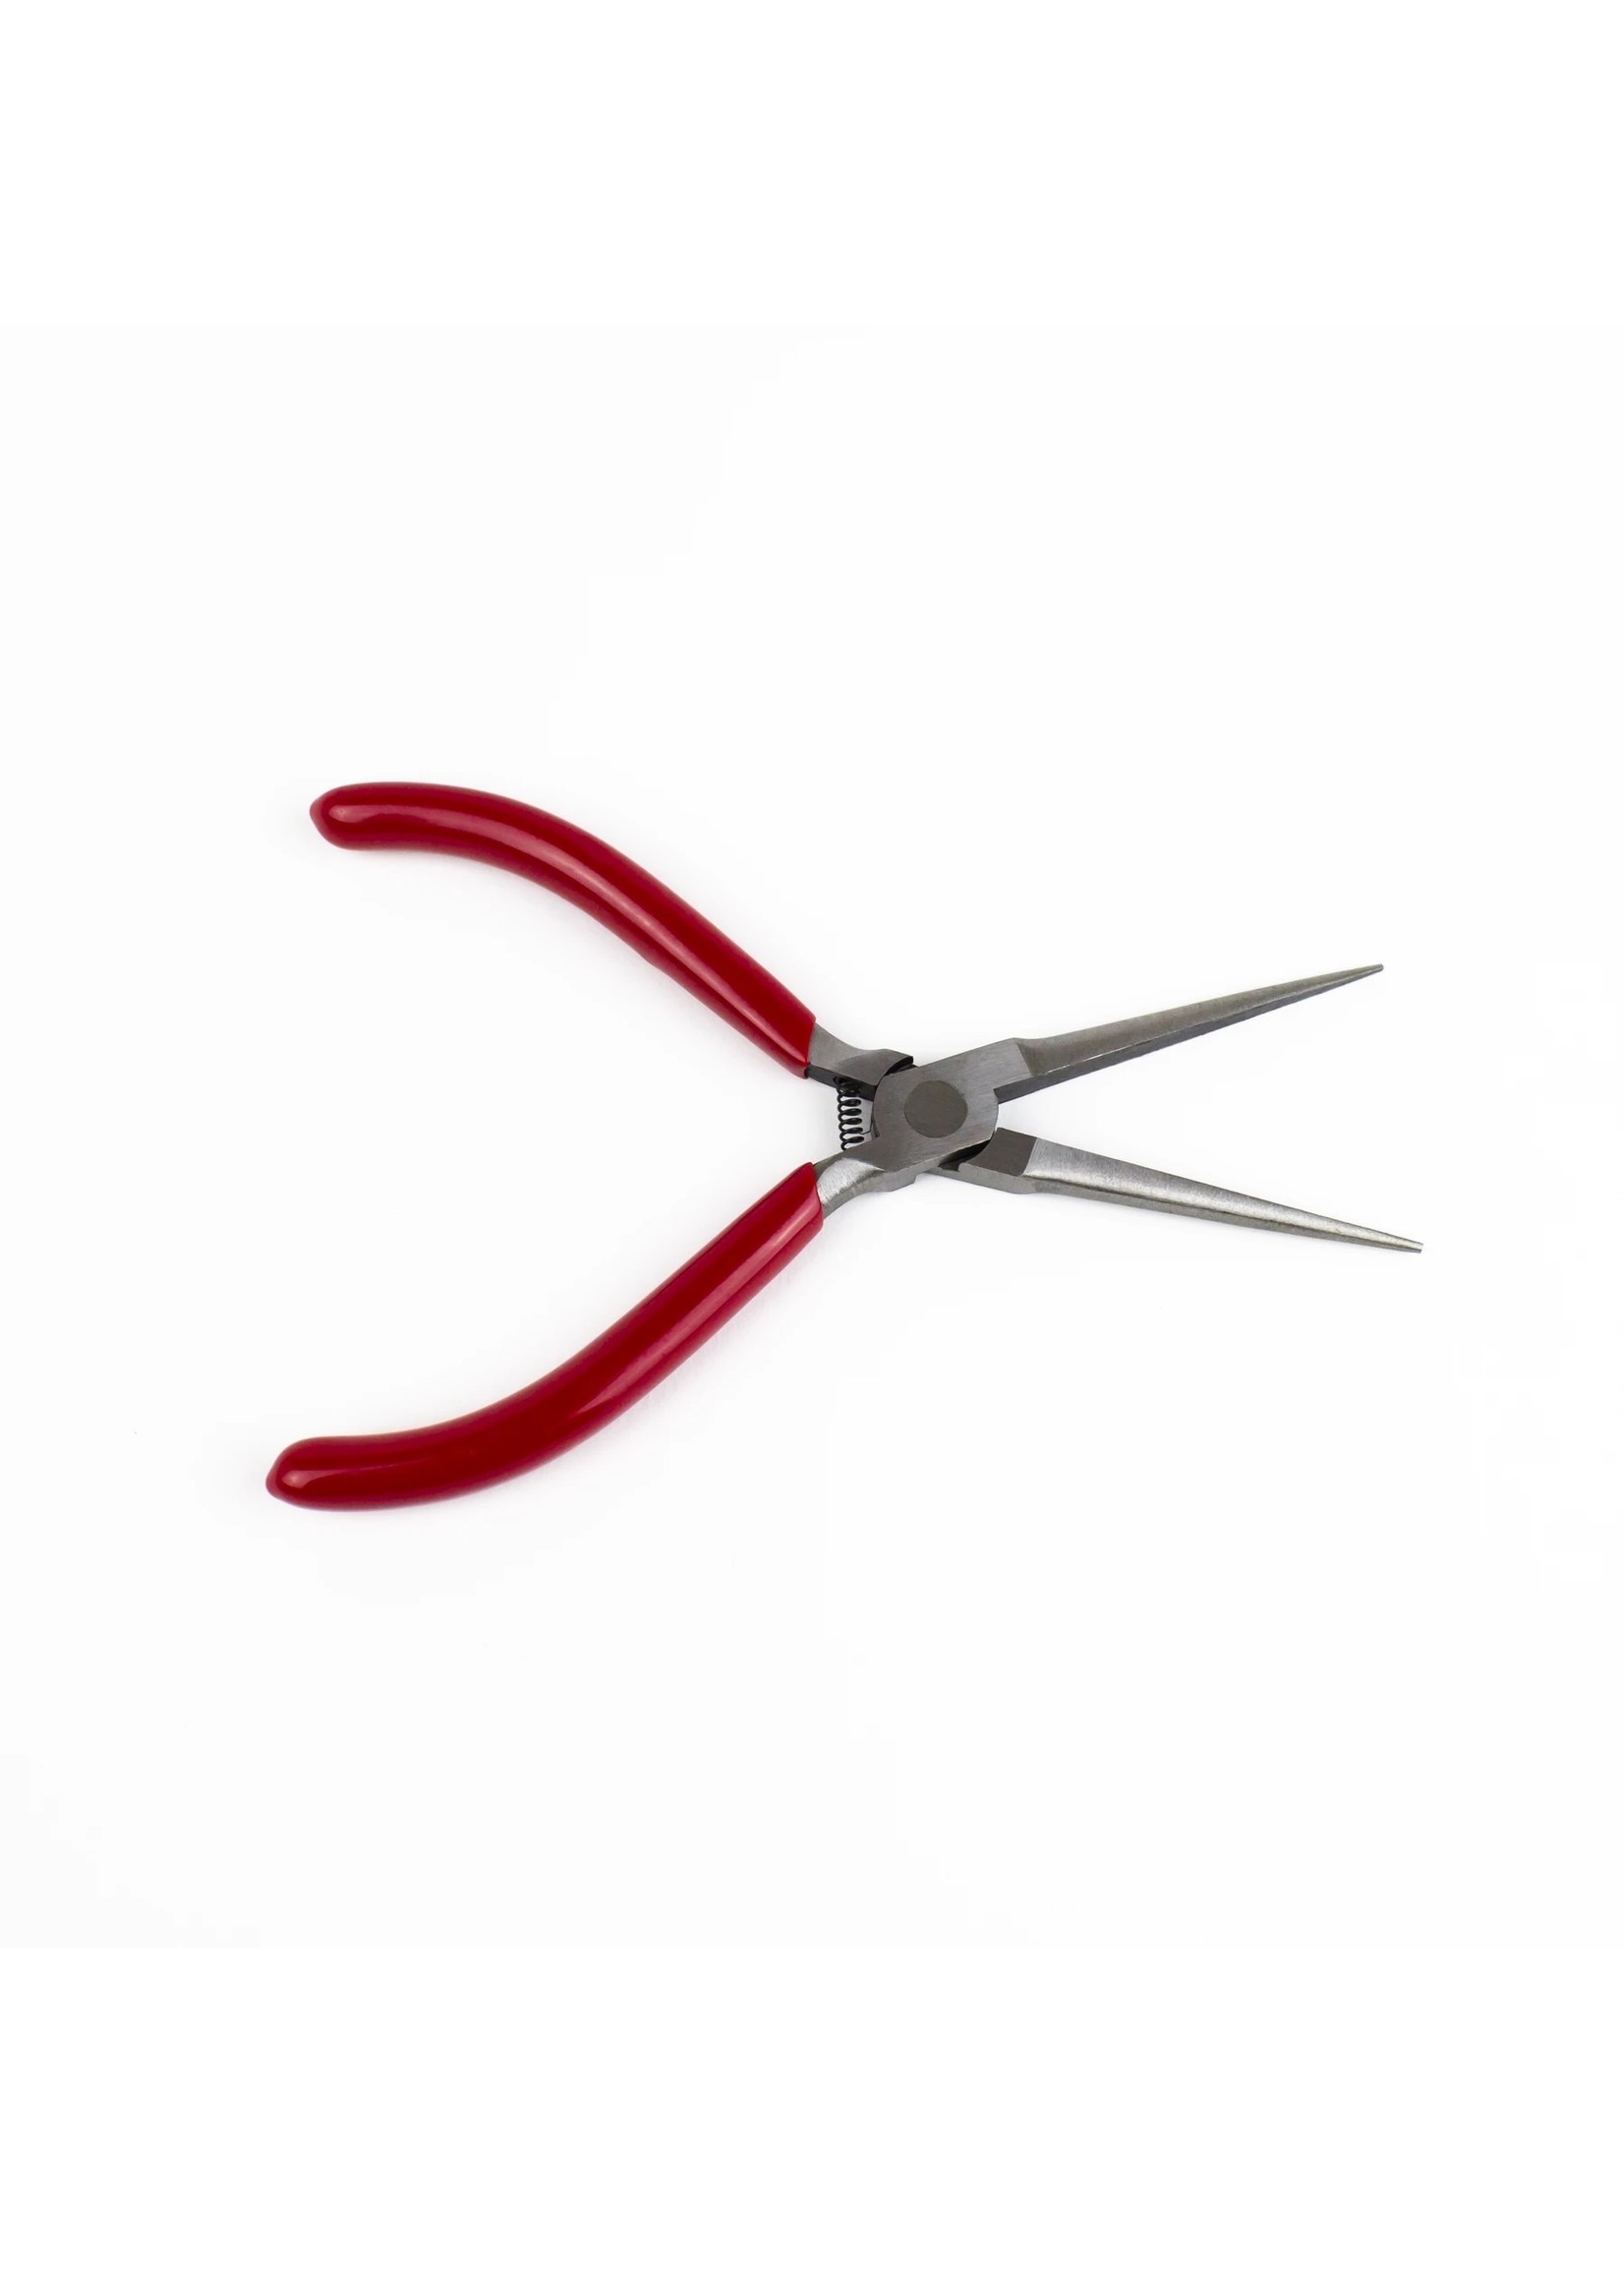 Needle Nose Extra Long Nose Pliers Jewelry Making Pliers Jewelry Tools